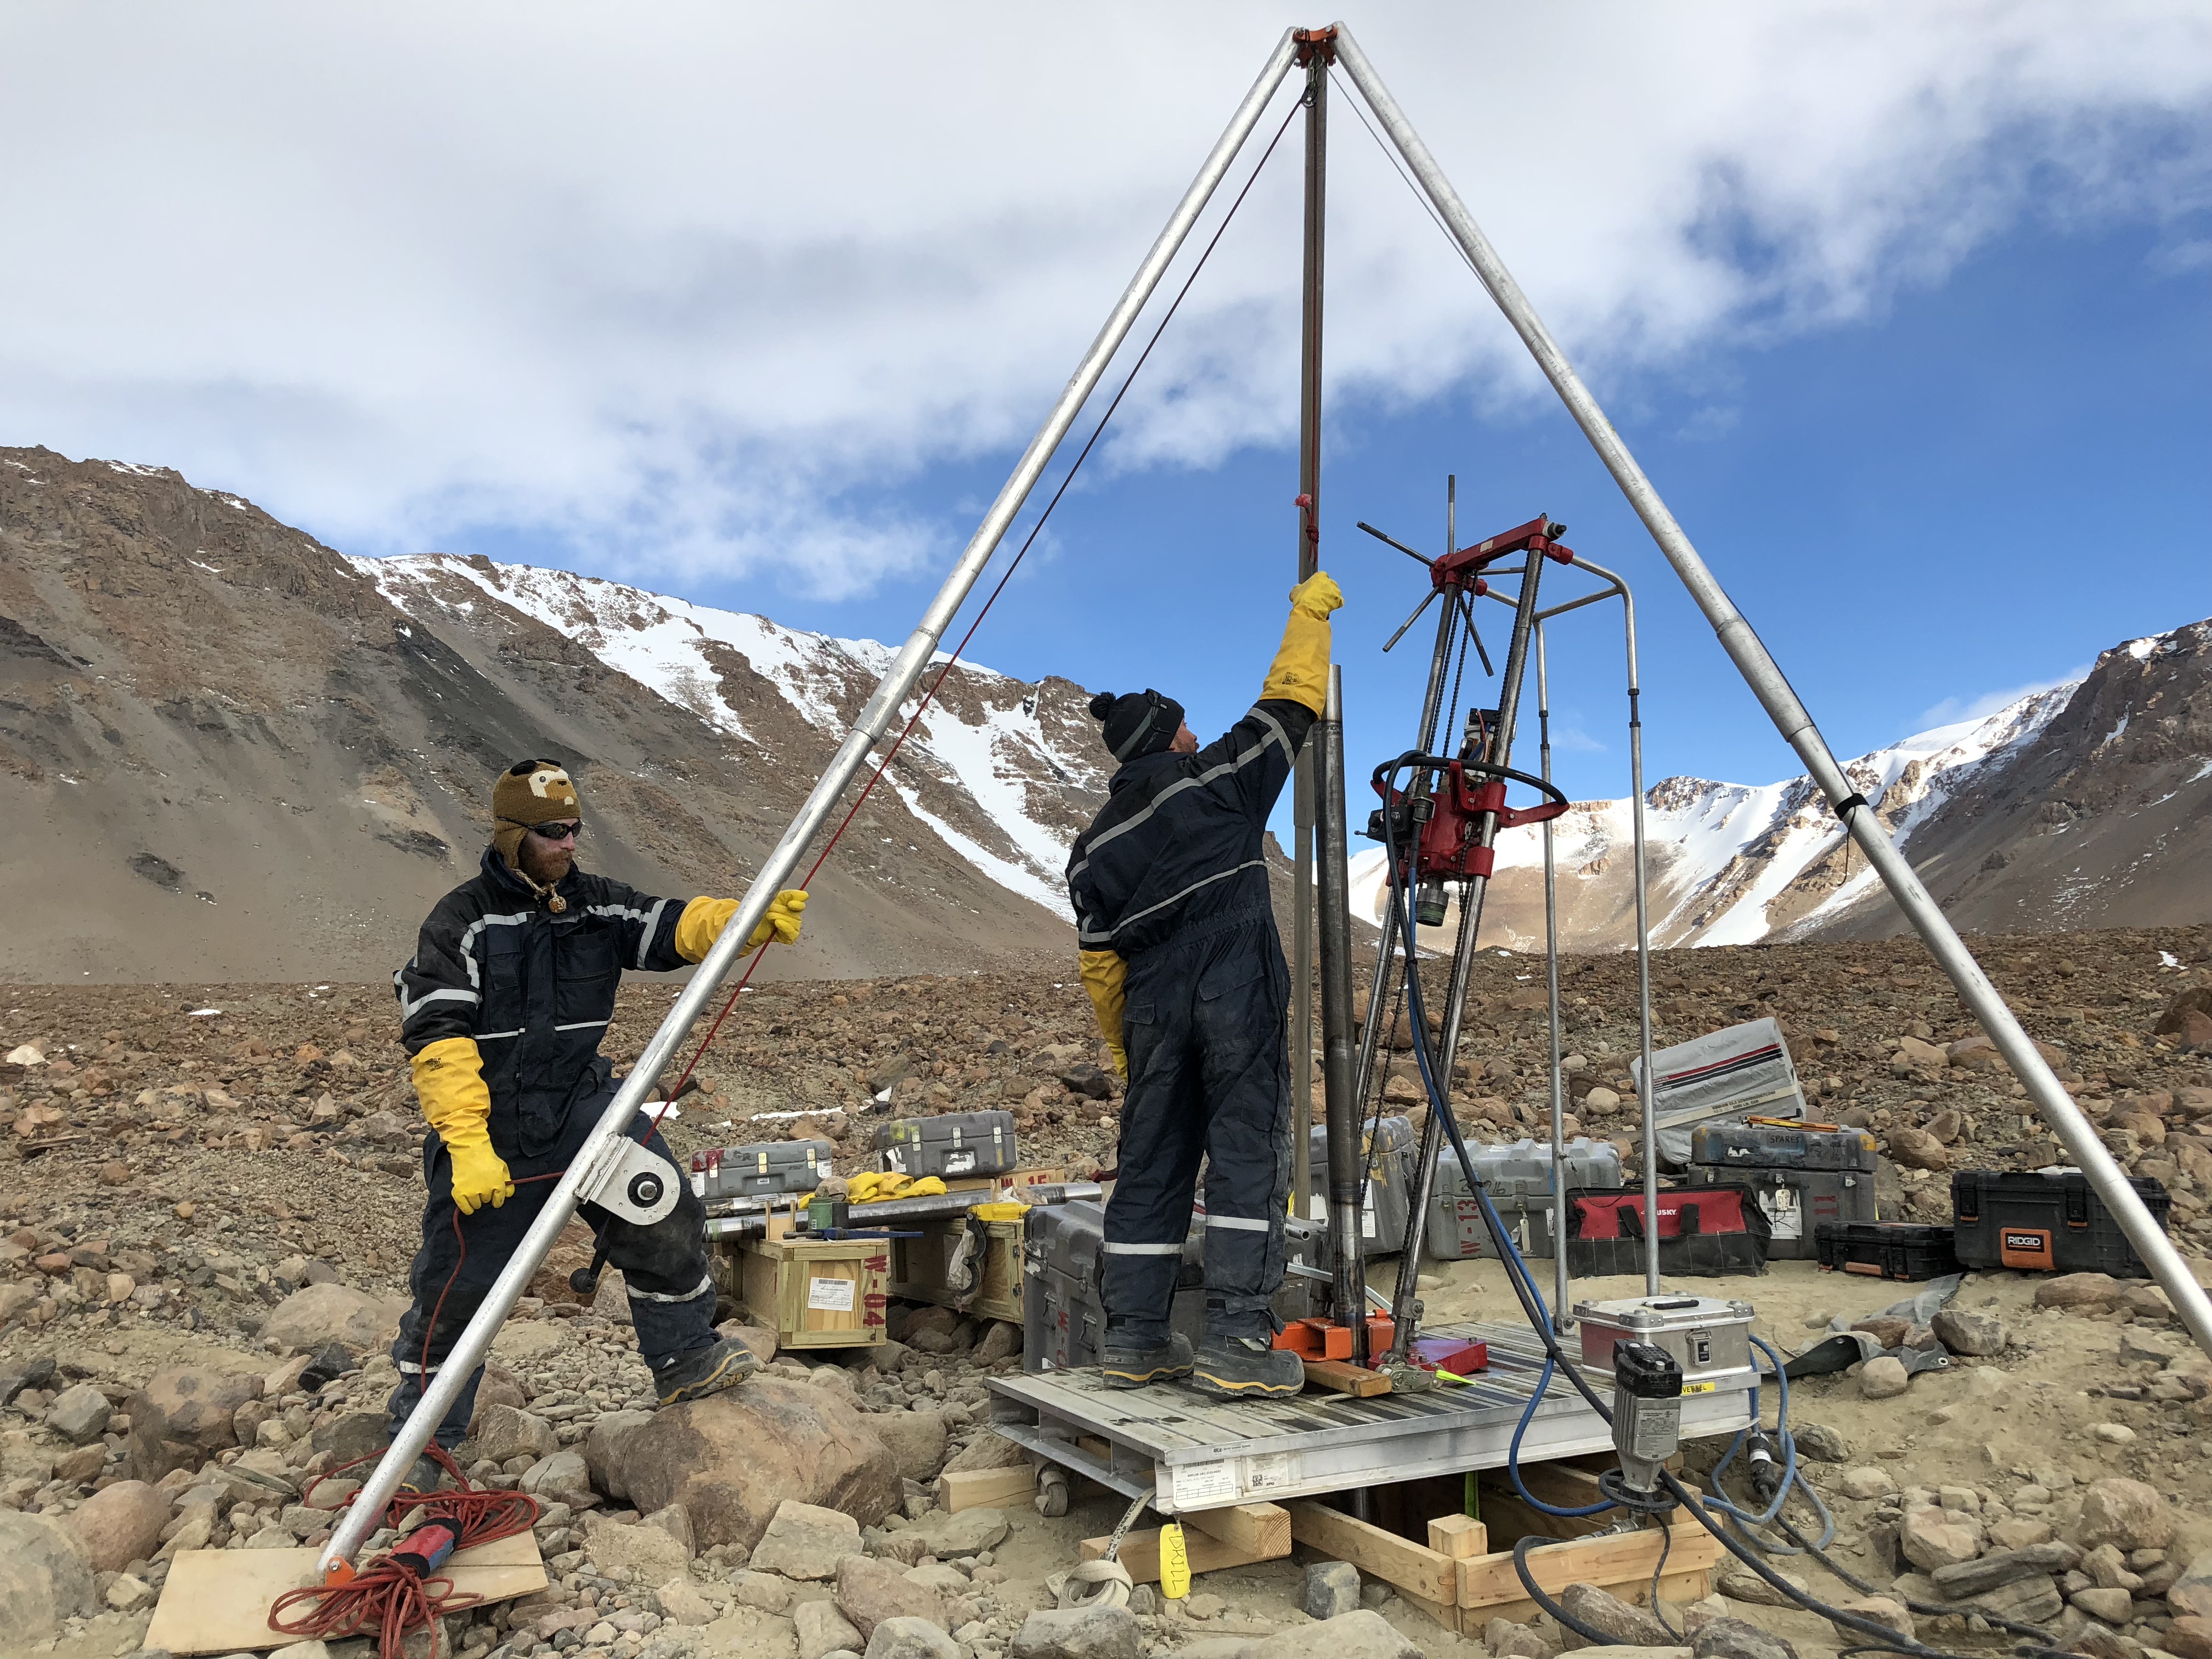 a research team is planning to use an ice drill